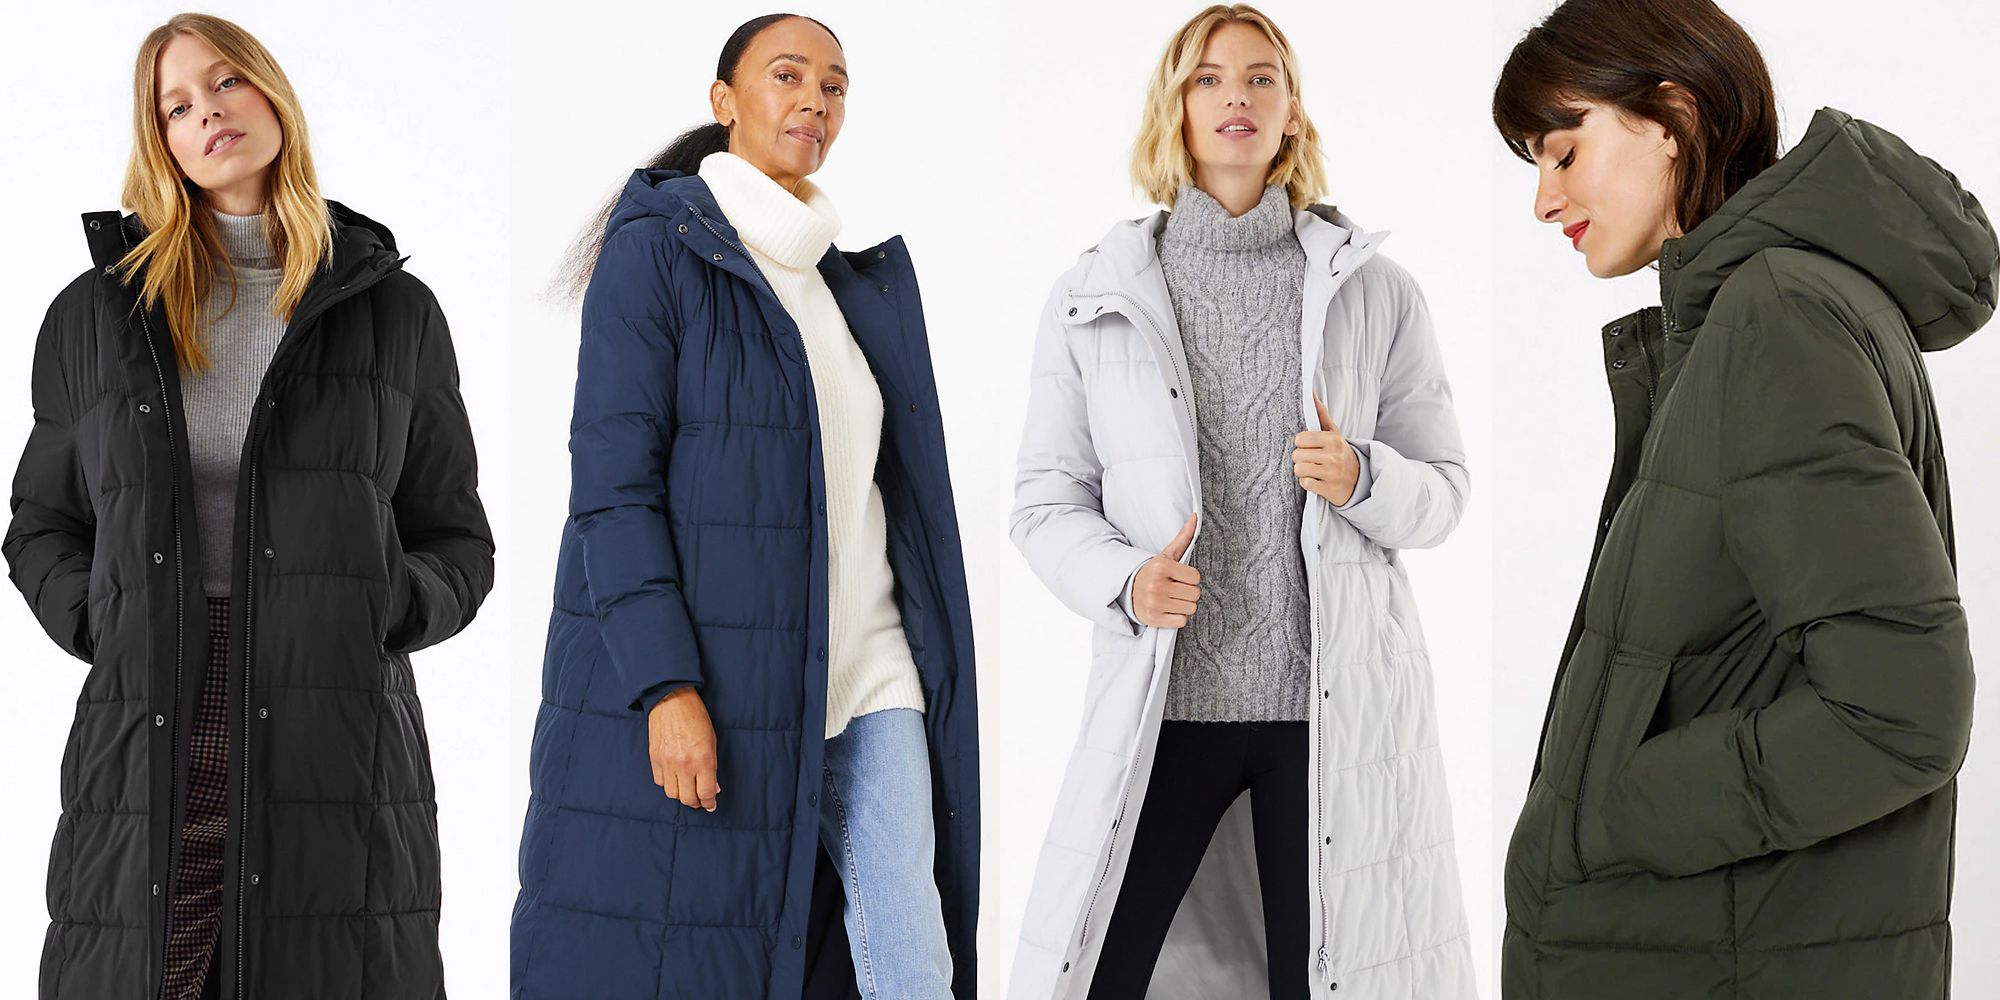 Boden's longline puffer jacket is perfect for long walks in the cold